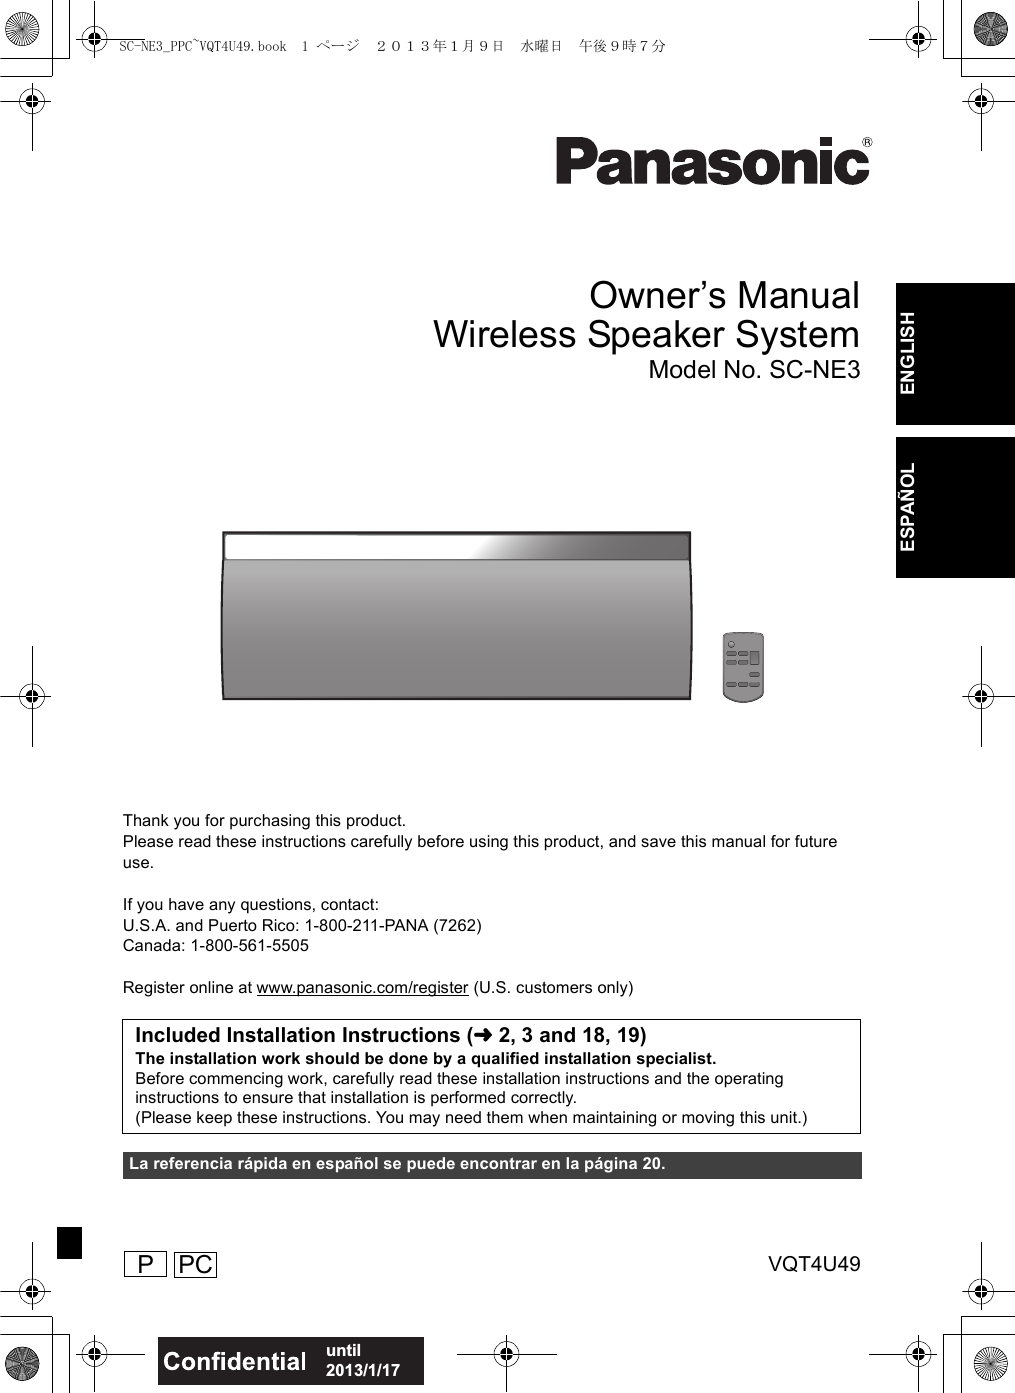 VQT4U49until 2013/1/17ENGLISHESPAÑOLOwner’s ManualWireless Speaker SystemModel No. SC-NE3Thank you for purchasing this product.Please read these instructions carefully before using this product, and save this manual for future use.If you have any questions, contact:U.S.A. and Puerto Rico: 1-800-211-PANA (7262)Canada: 1-800-561-5505Register online at www.panasonic.com/register (U.S. customers only)Included Installation Instructions (l2, 3 and 18, 19)The installation work should be done by a qualified installation specialist.Before commencing work, carefully read these installation instructions and the operating instructions to ensure that installation is performed correctly.(Please keep these instructions. You may need them when maintaining or moving this unit.)La referencia rápida en español se puede encontrar en la página 20. PPCSC-NE3_PPC~VQT4U49.book  1 ページ  ２０１３年１月９日　水曜日　午後９時７分